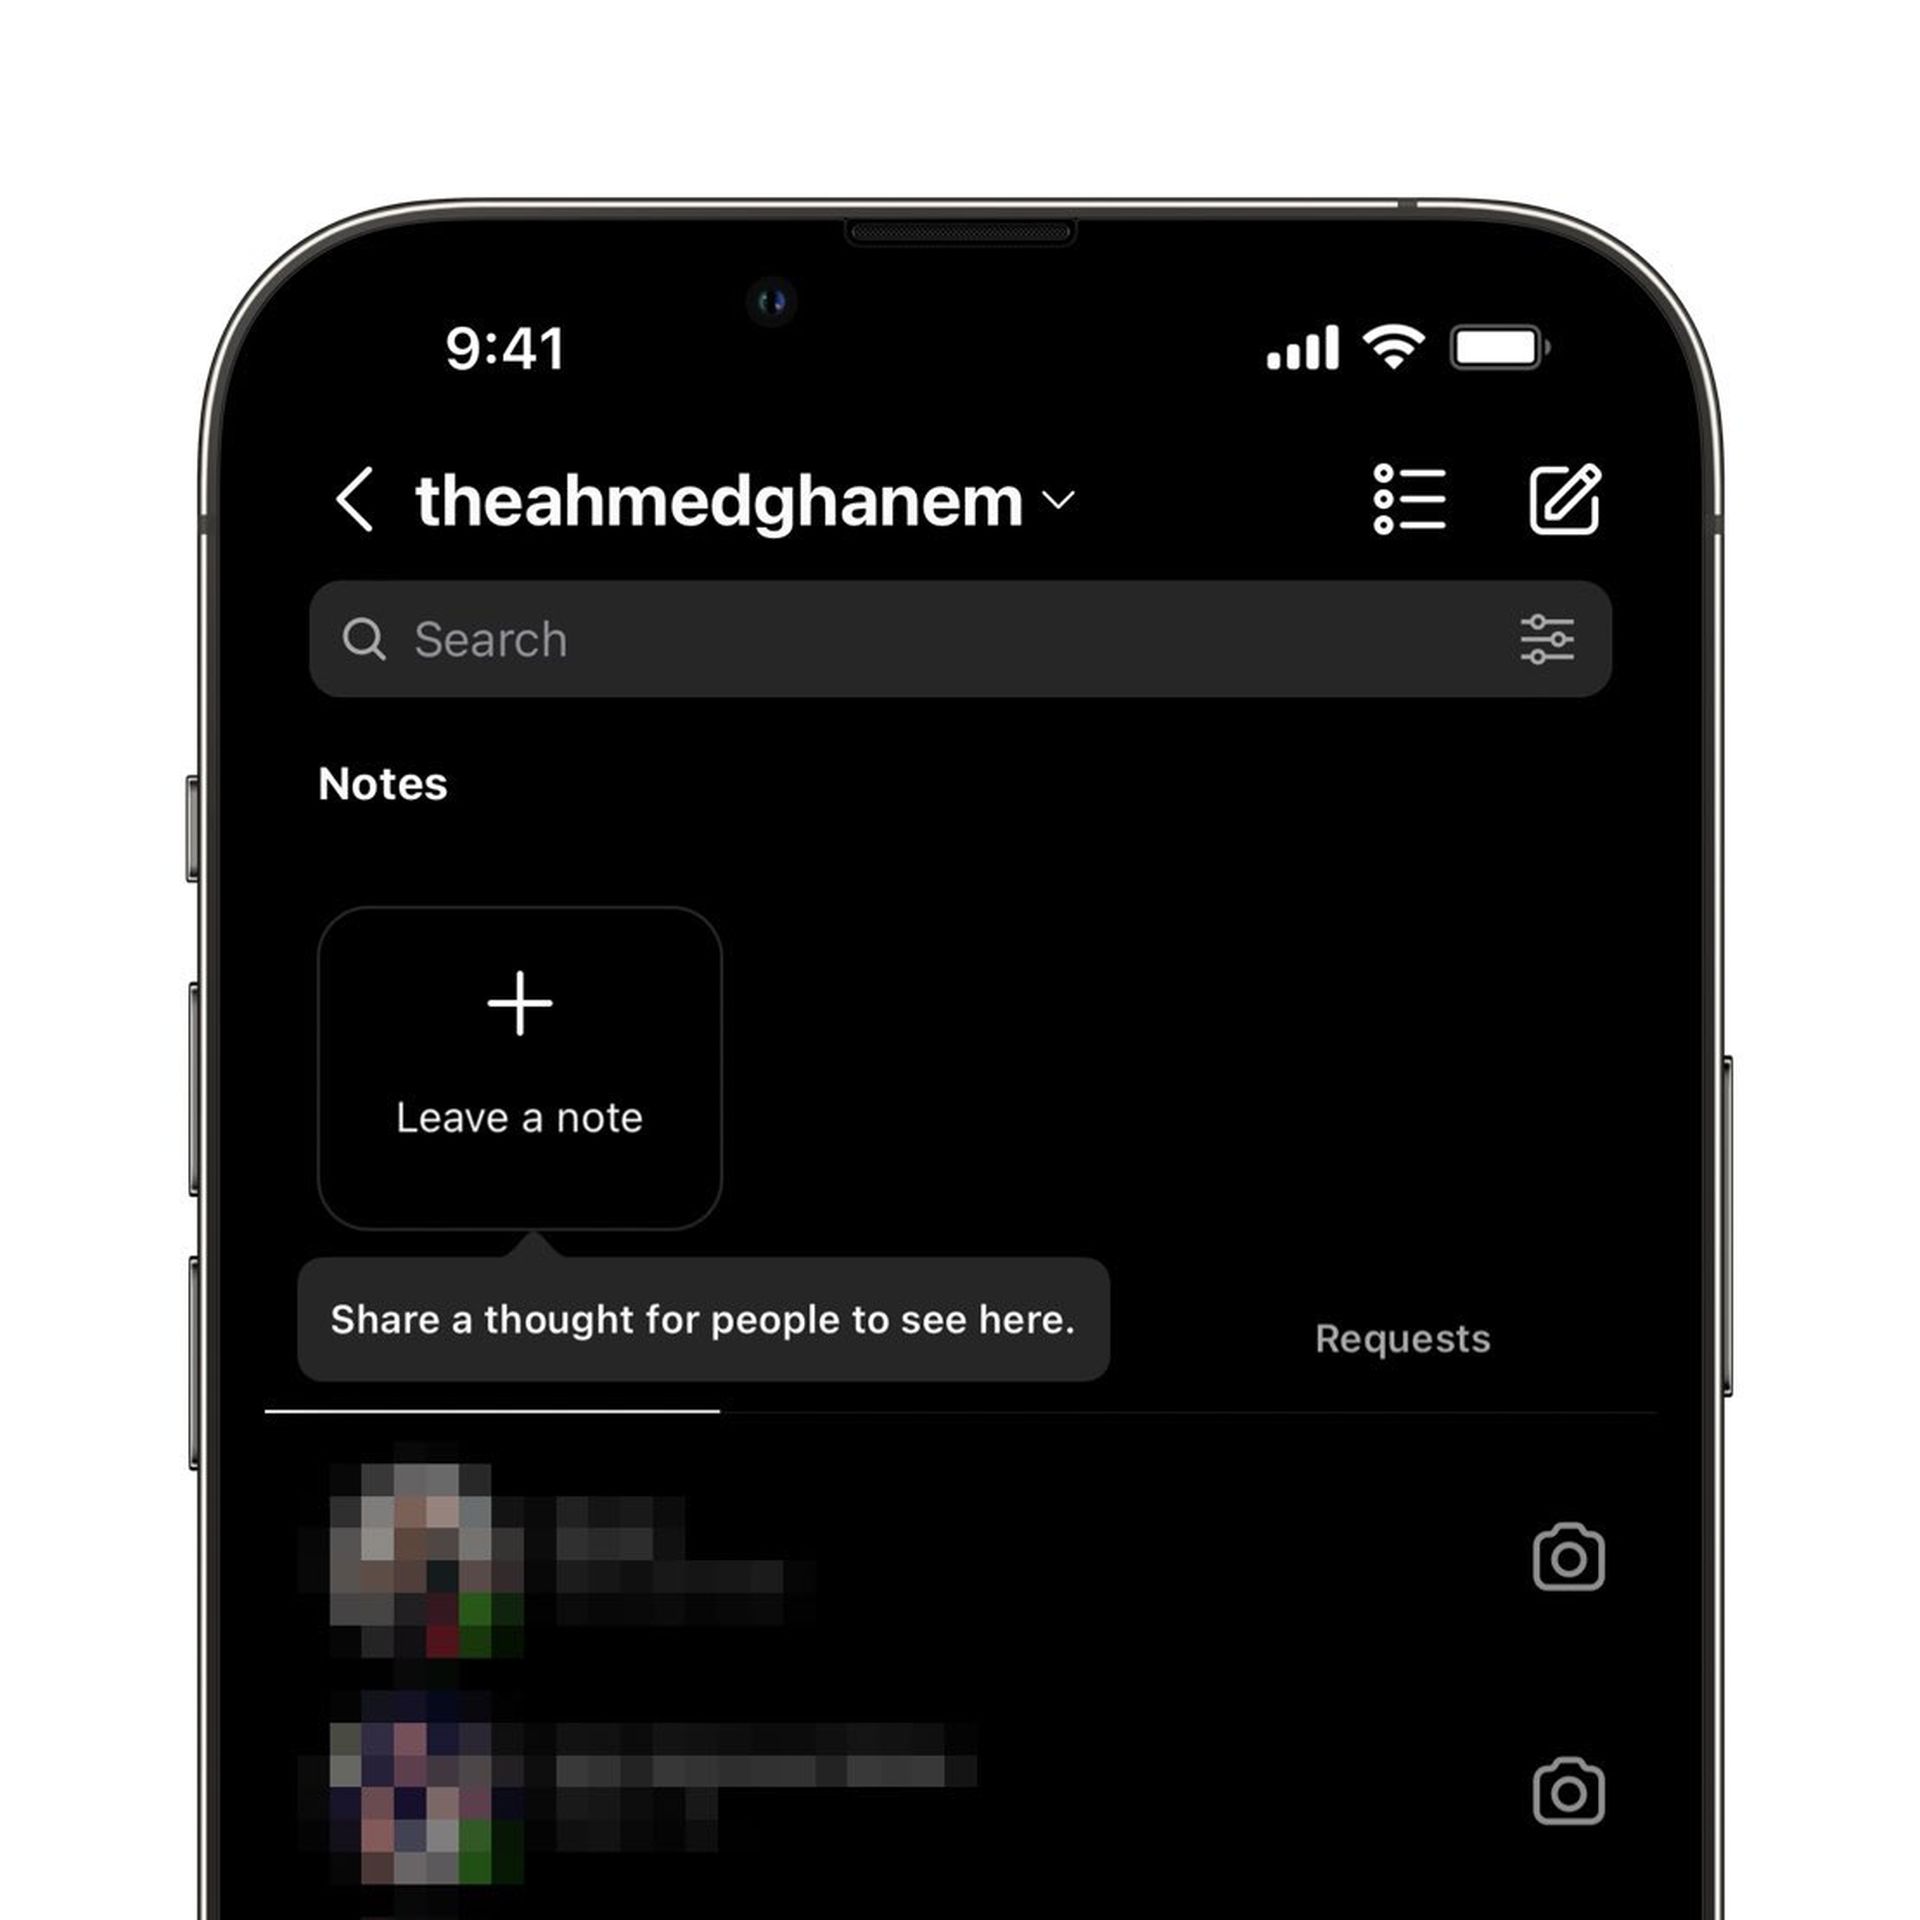 In this article, we will be covering the Instagram Notes feature, as well as trying to answer the question: "What are Instagram Notes?"